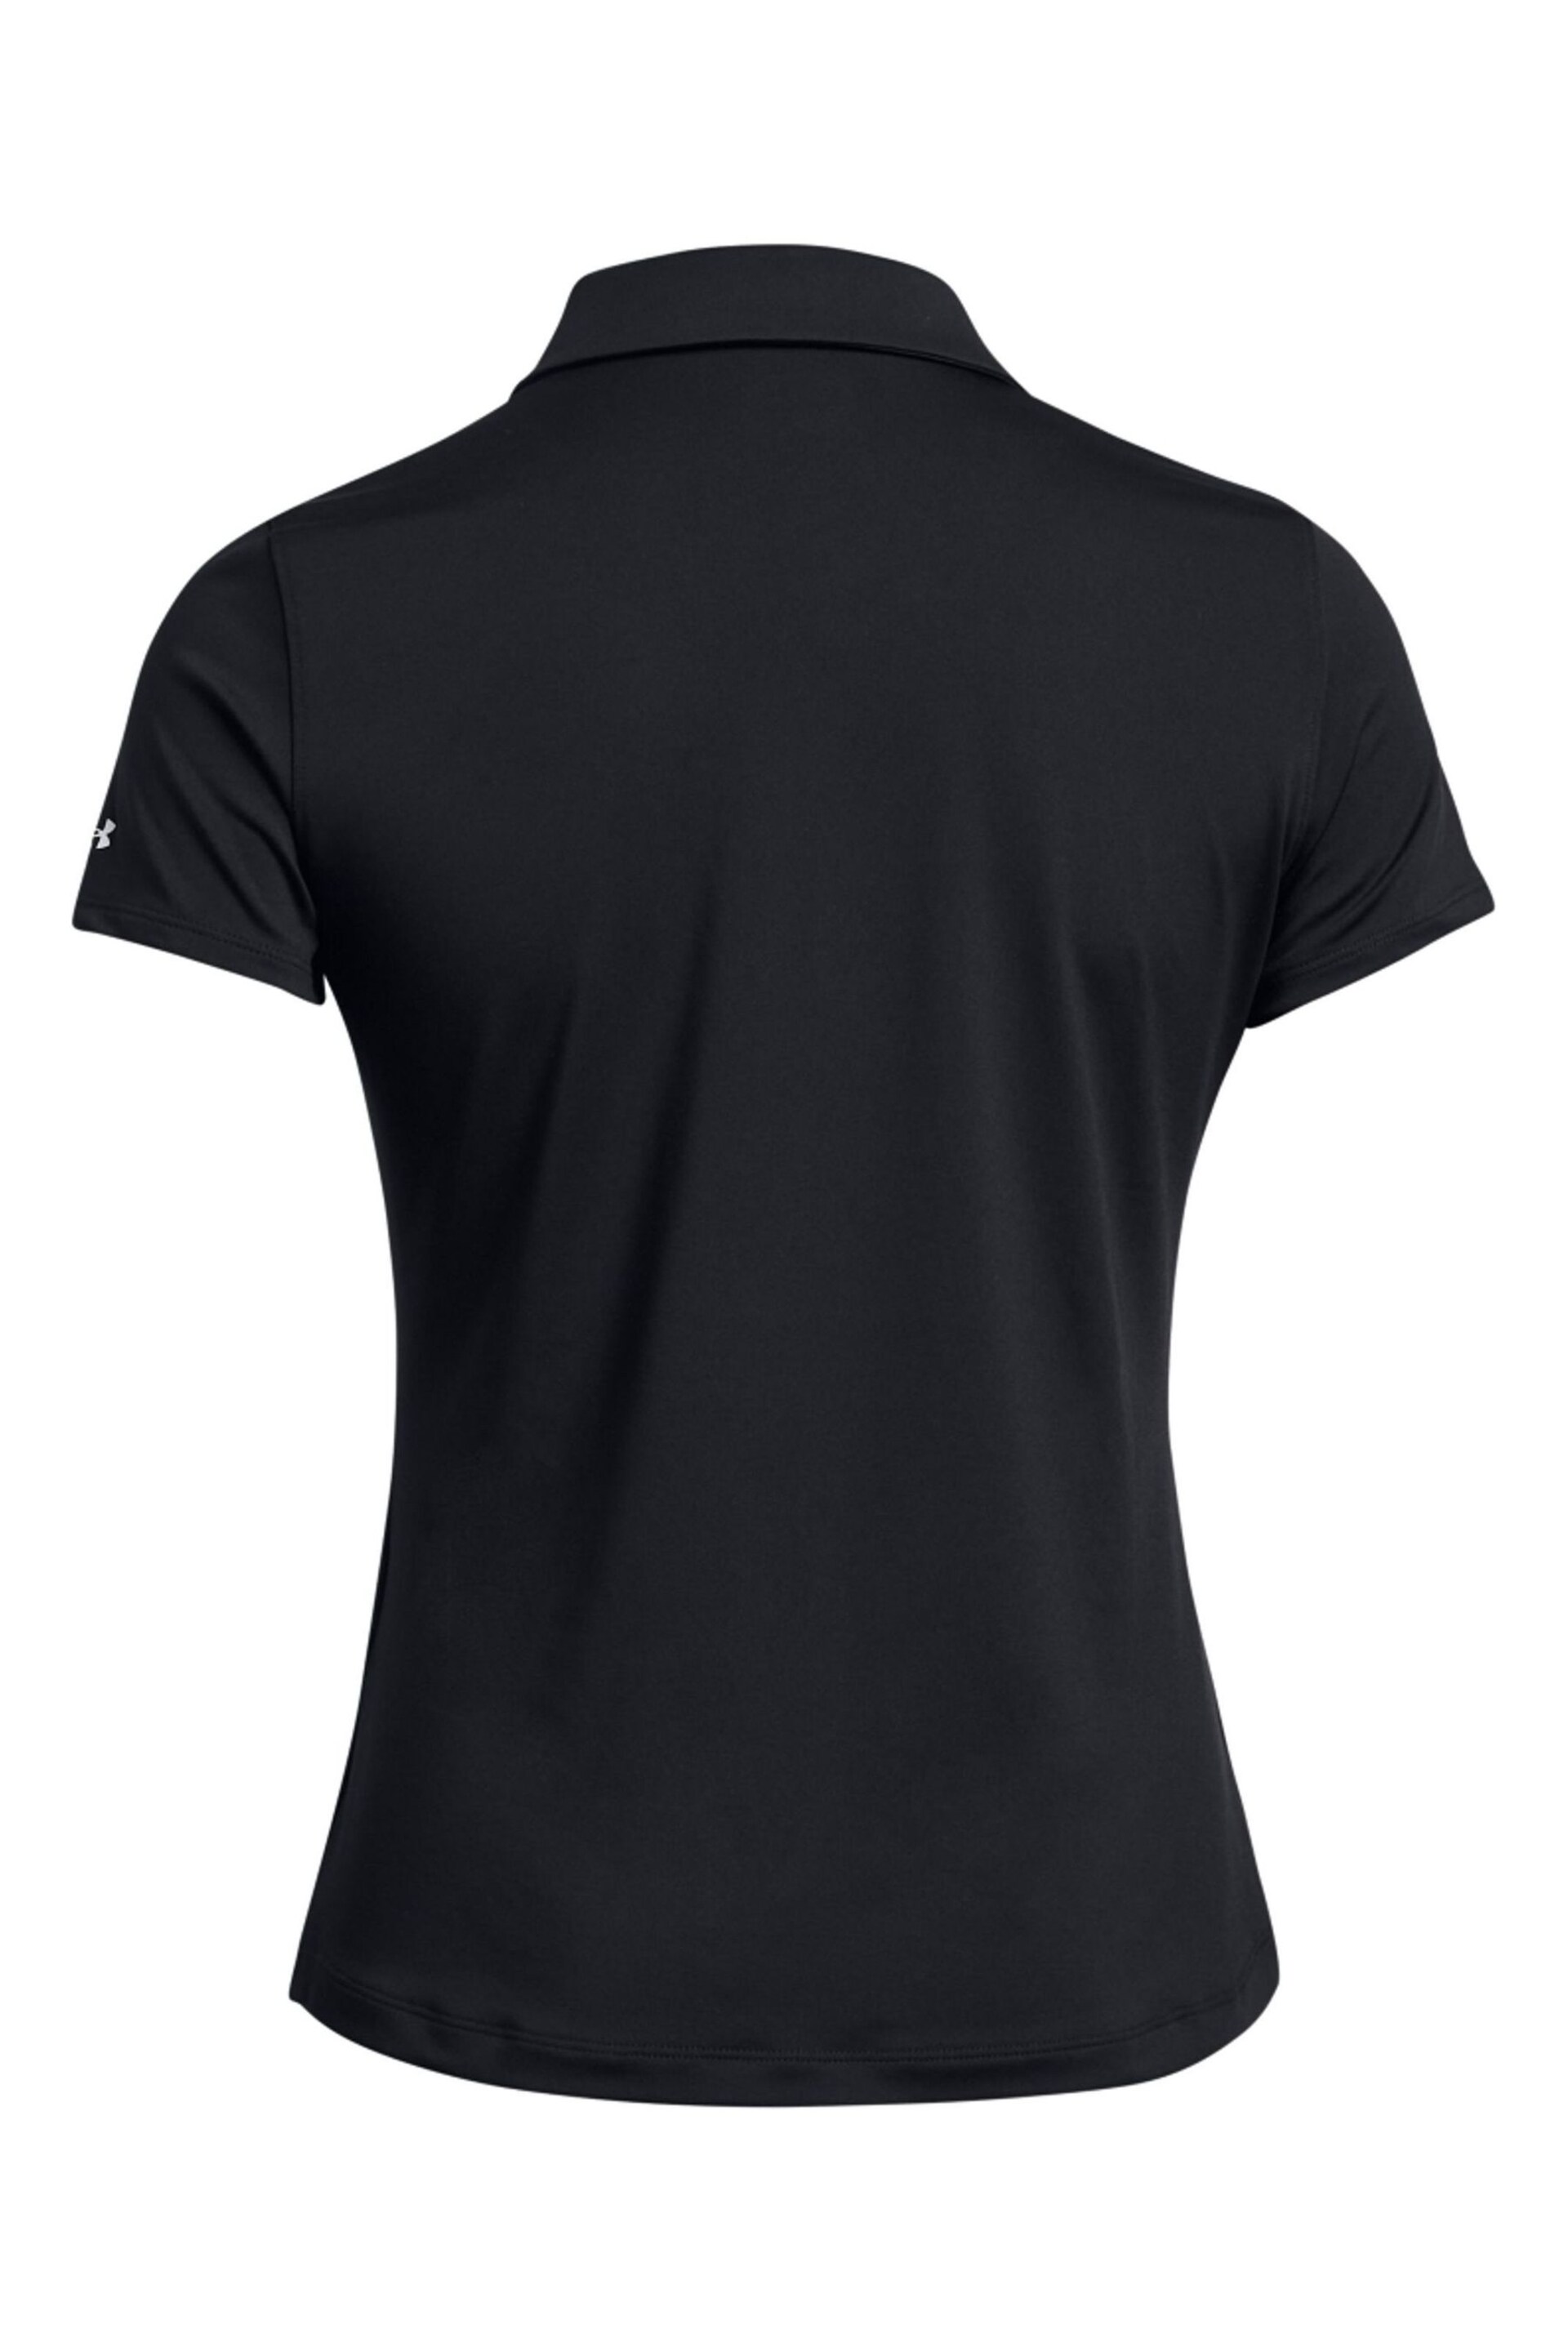 Under Armour Black Play Off Small Logo Polo Shirt - Image 4 of 4